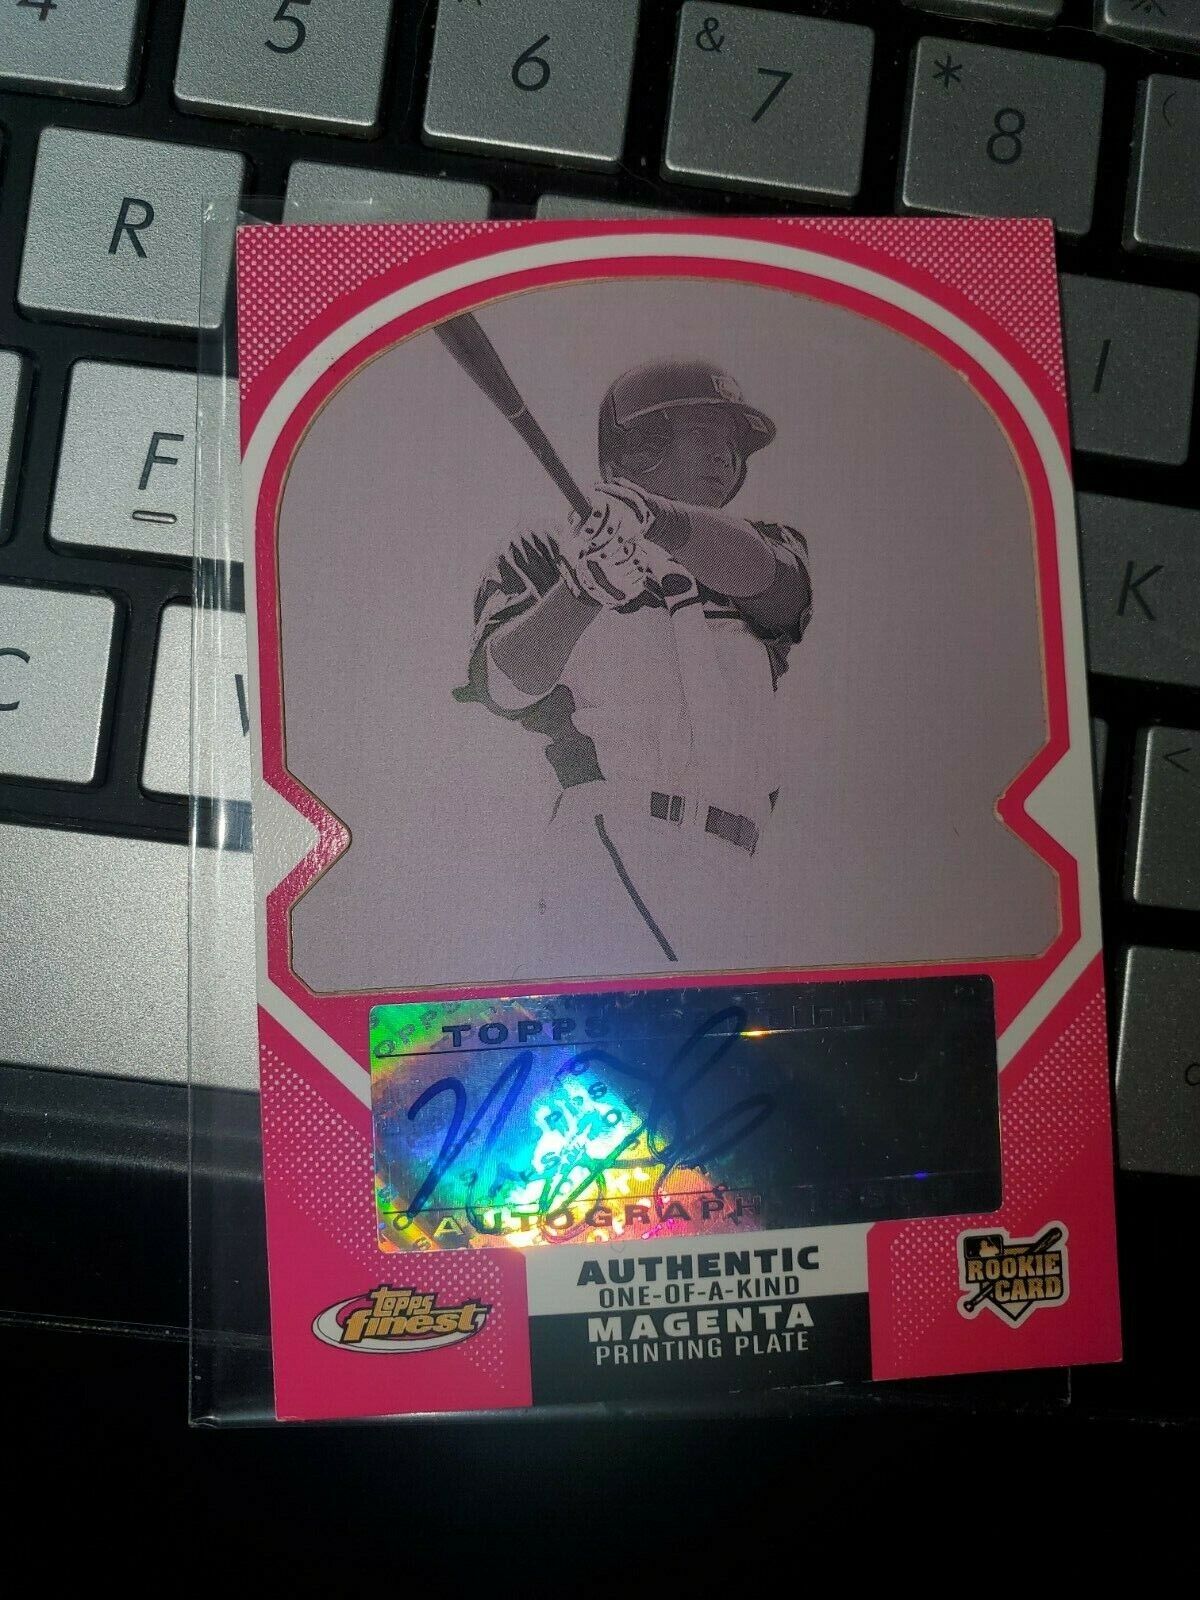 2006 TOPPS FINEST NELSON CRUZ AUTOGRAPHED PRINTING PLATE 1/1 ROOKIE